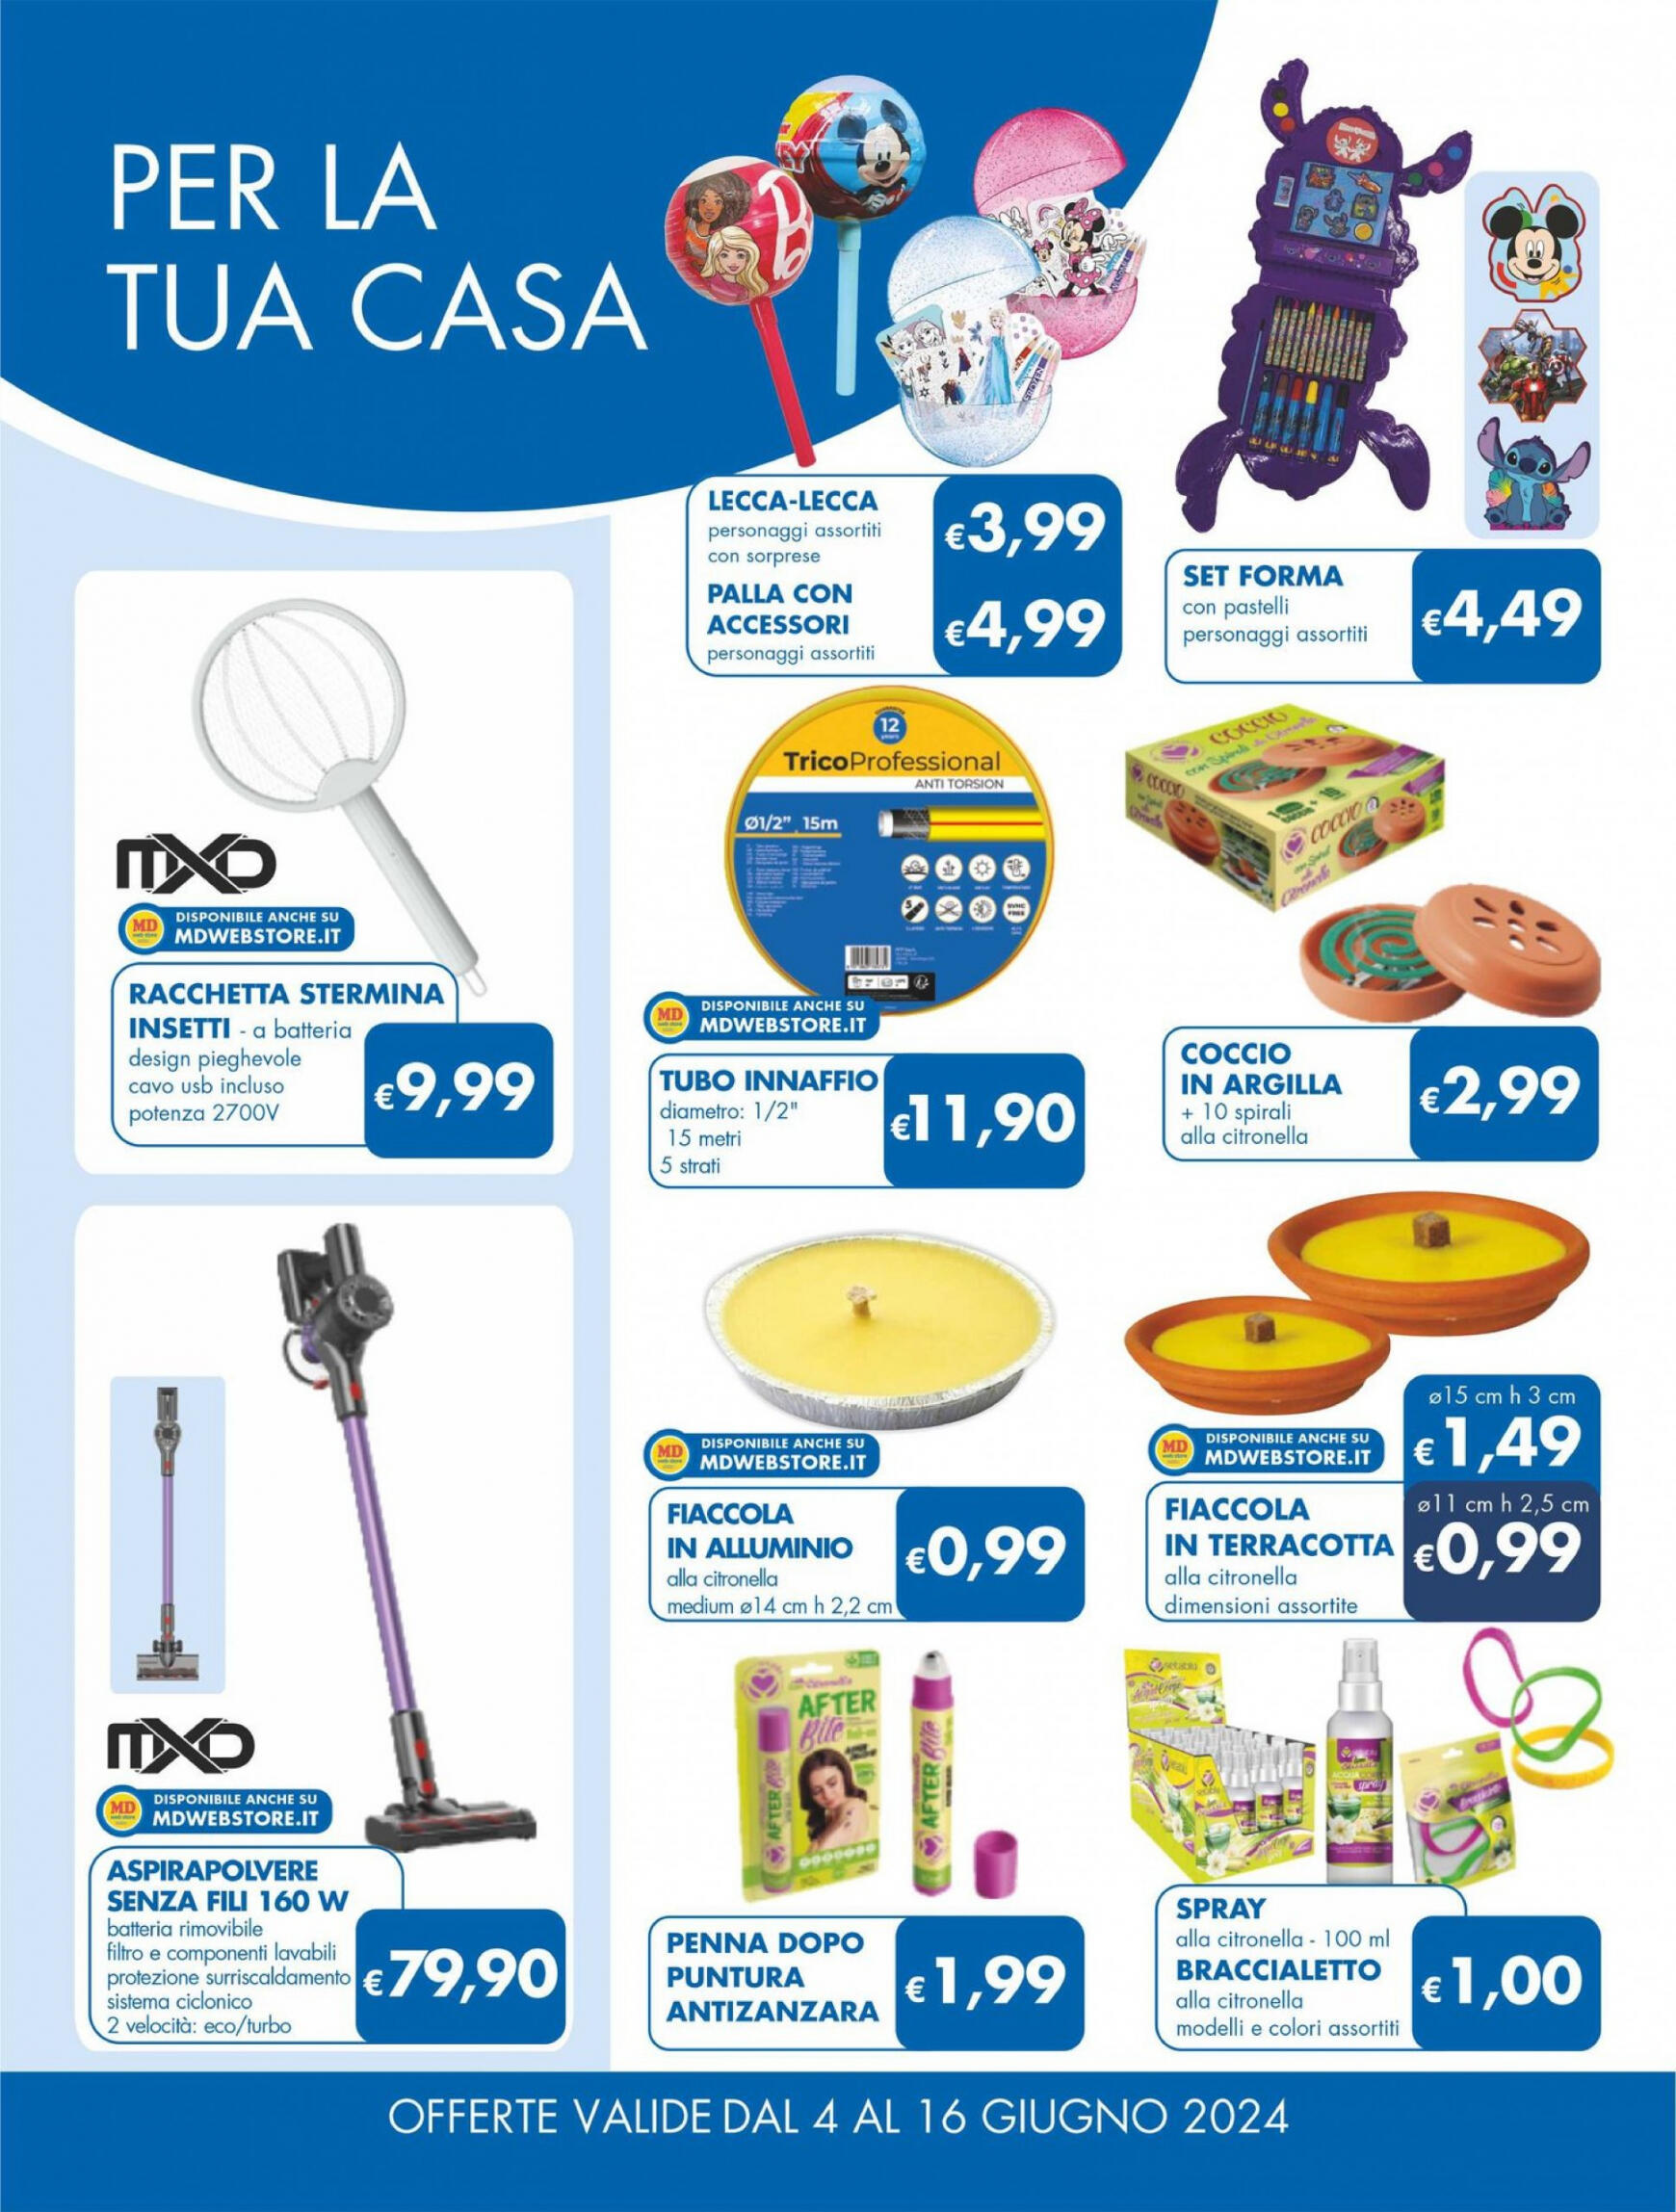 md-discount - Nuovo volantino MD 04.06. - 16.06. - page: 28